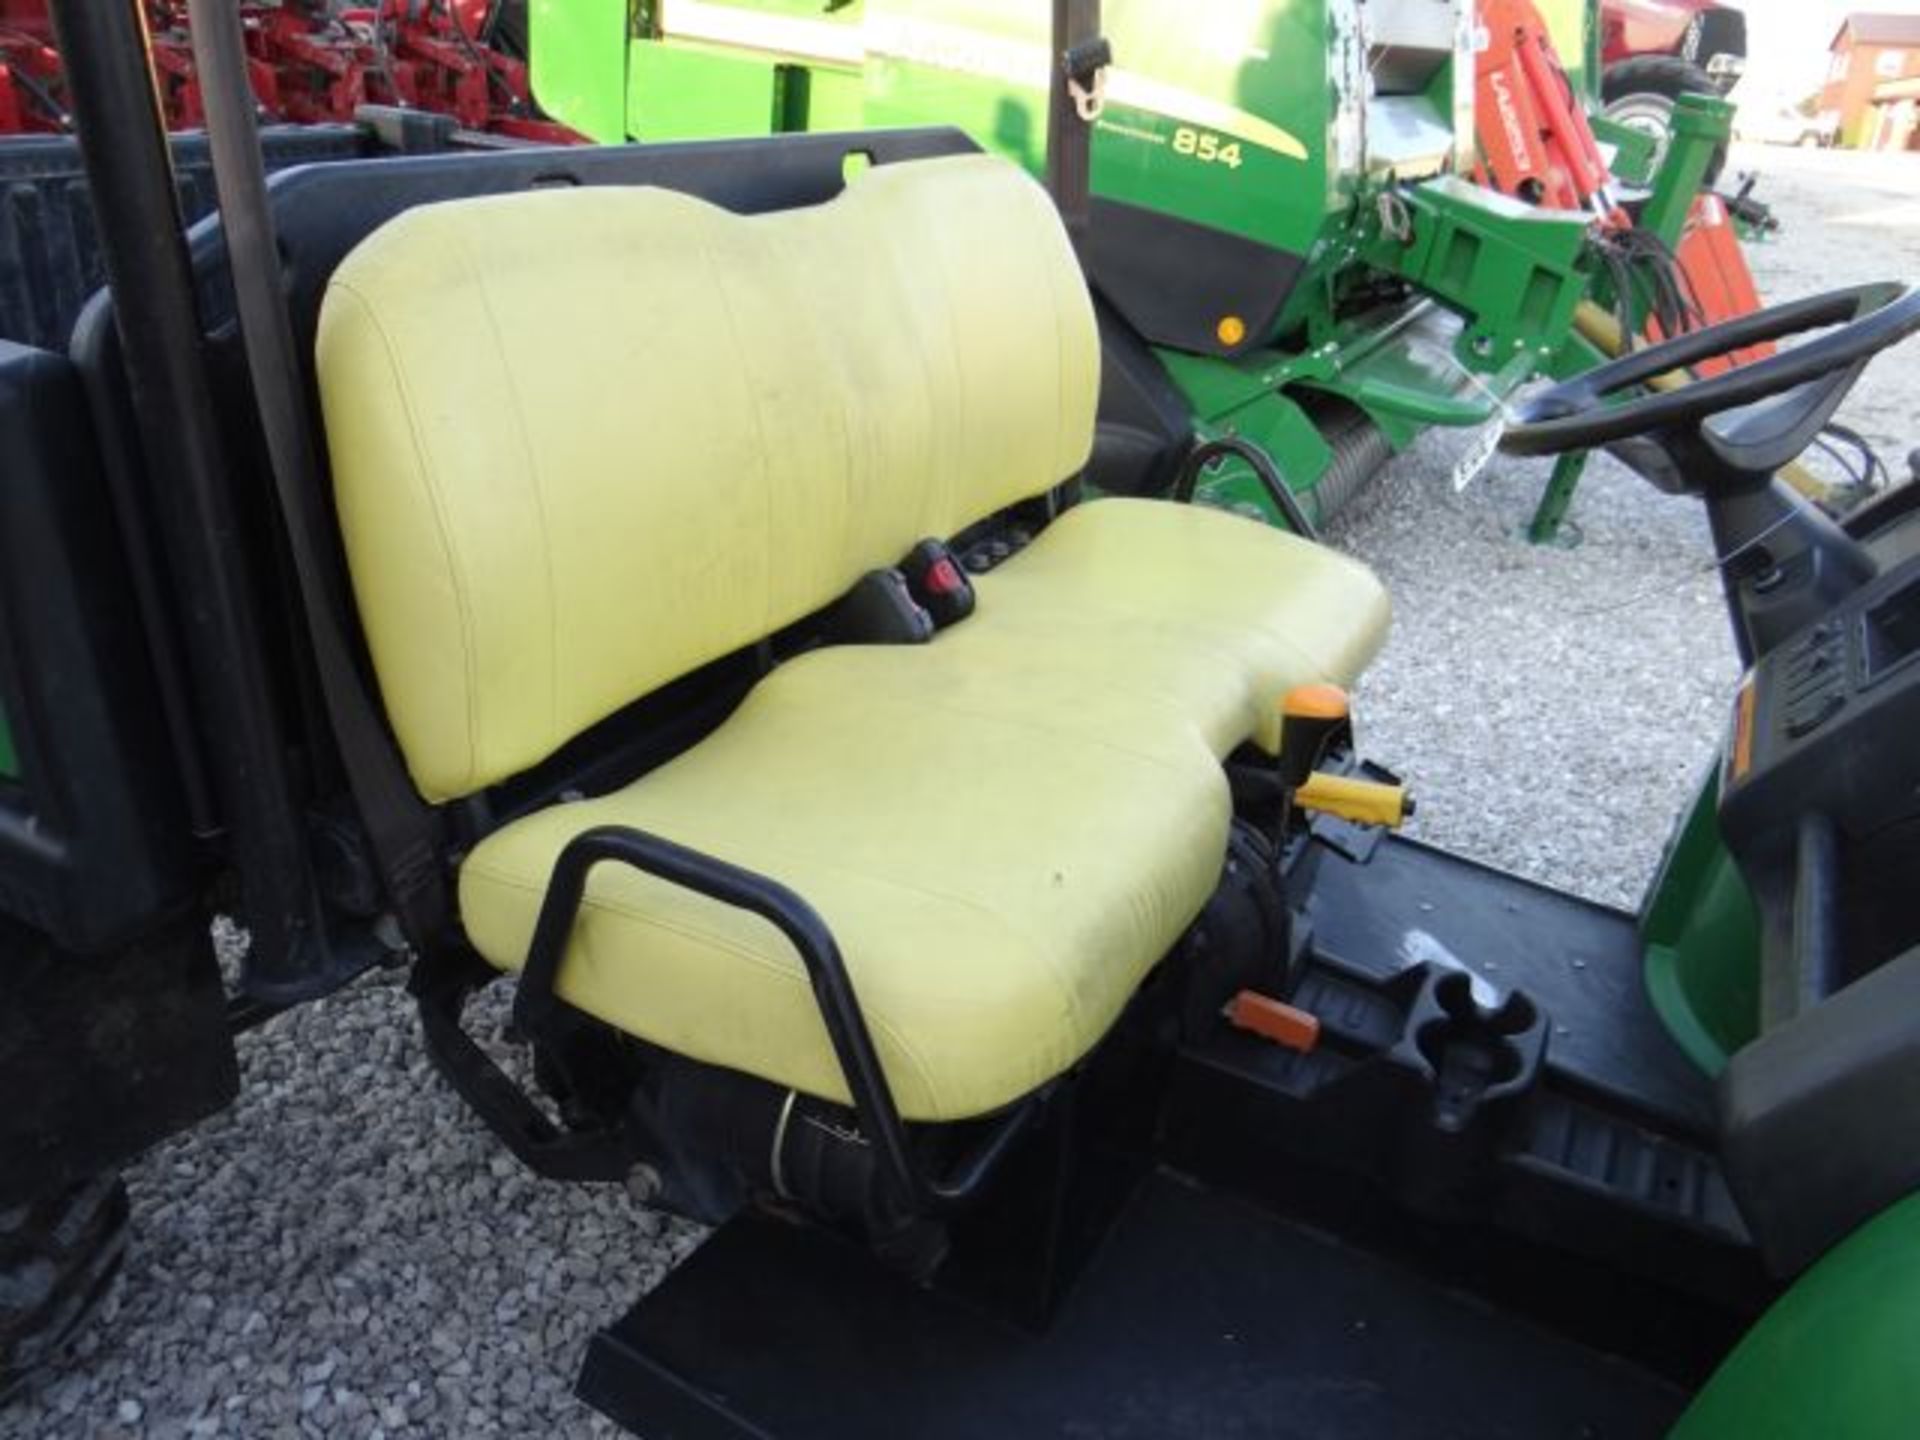 JD 625i Gator, 2011 #112652, 860 hrs, Bench Seat, ROPS - Image 3 of 4